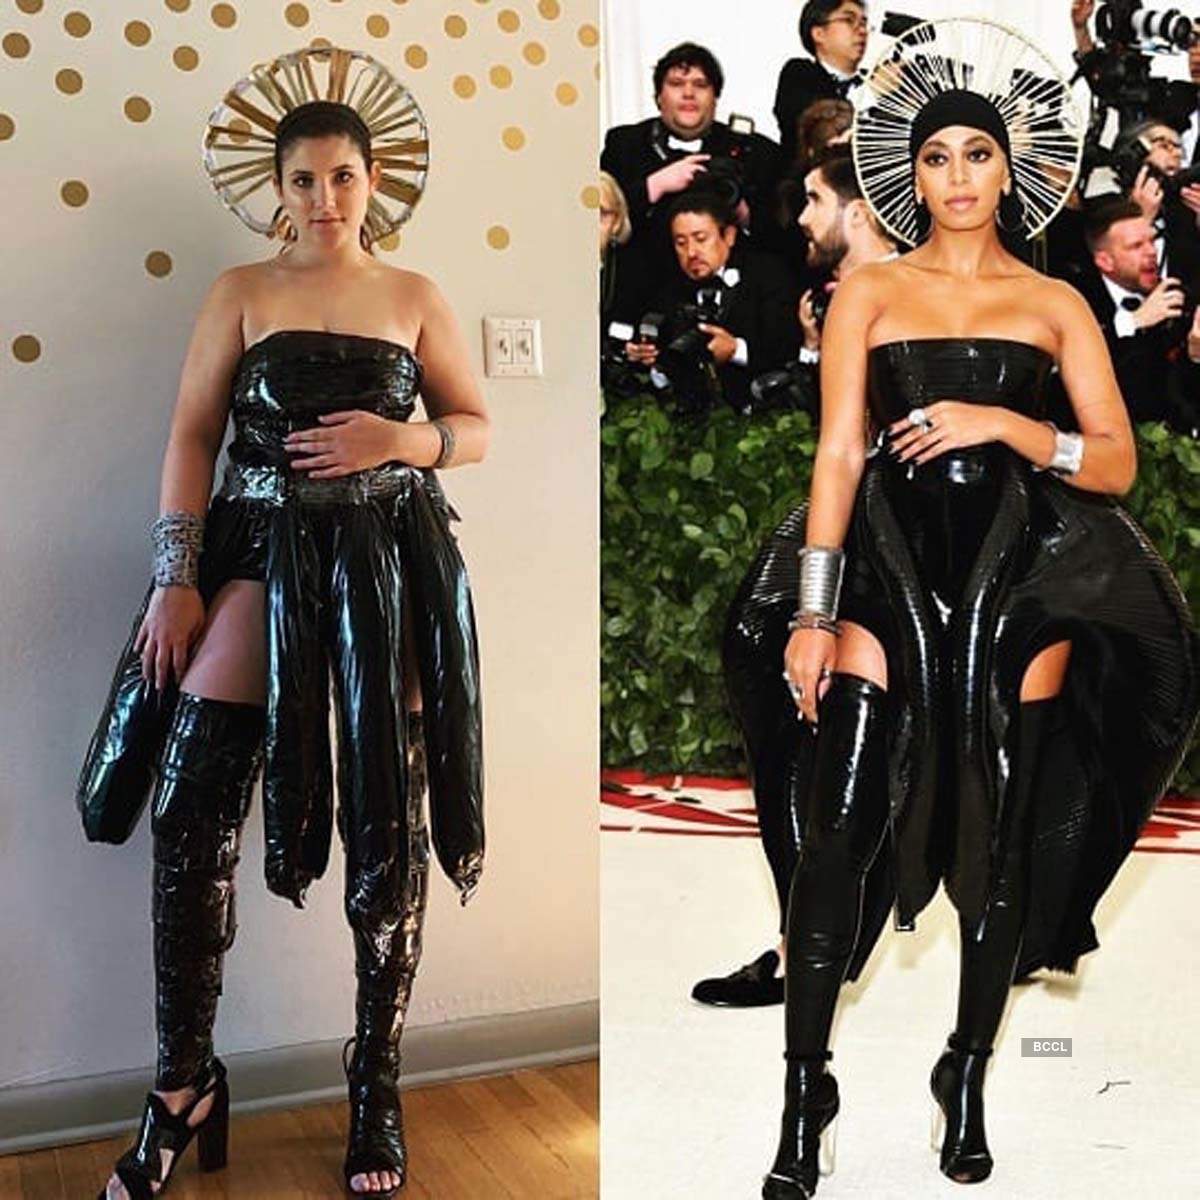 One creative guy recreated Met Gala gowns out of trash bags, tin